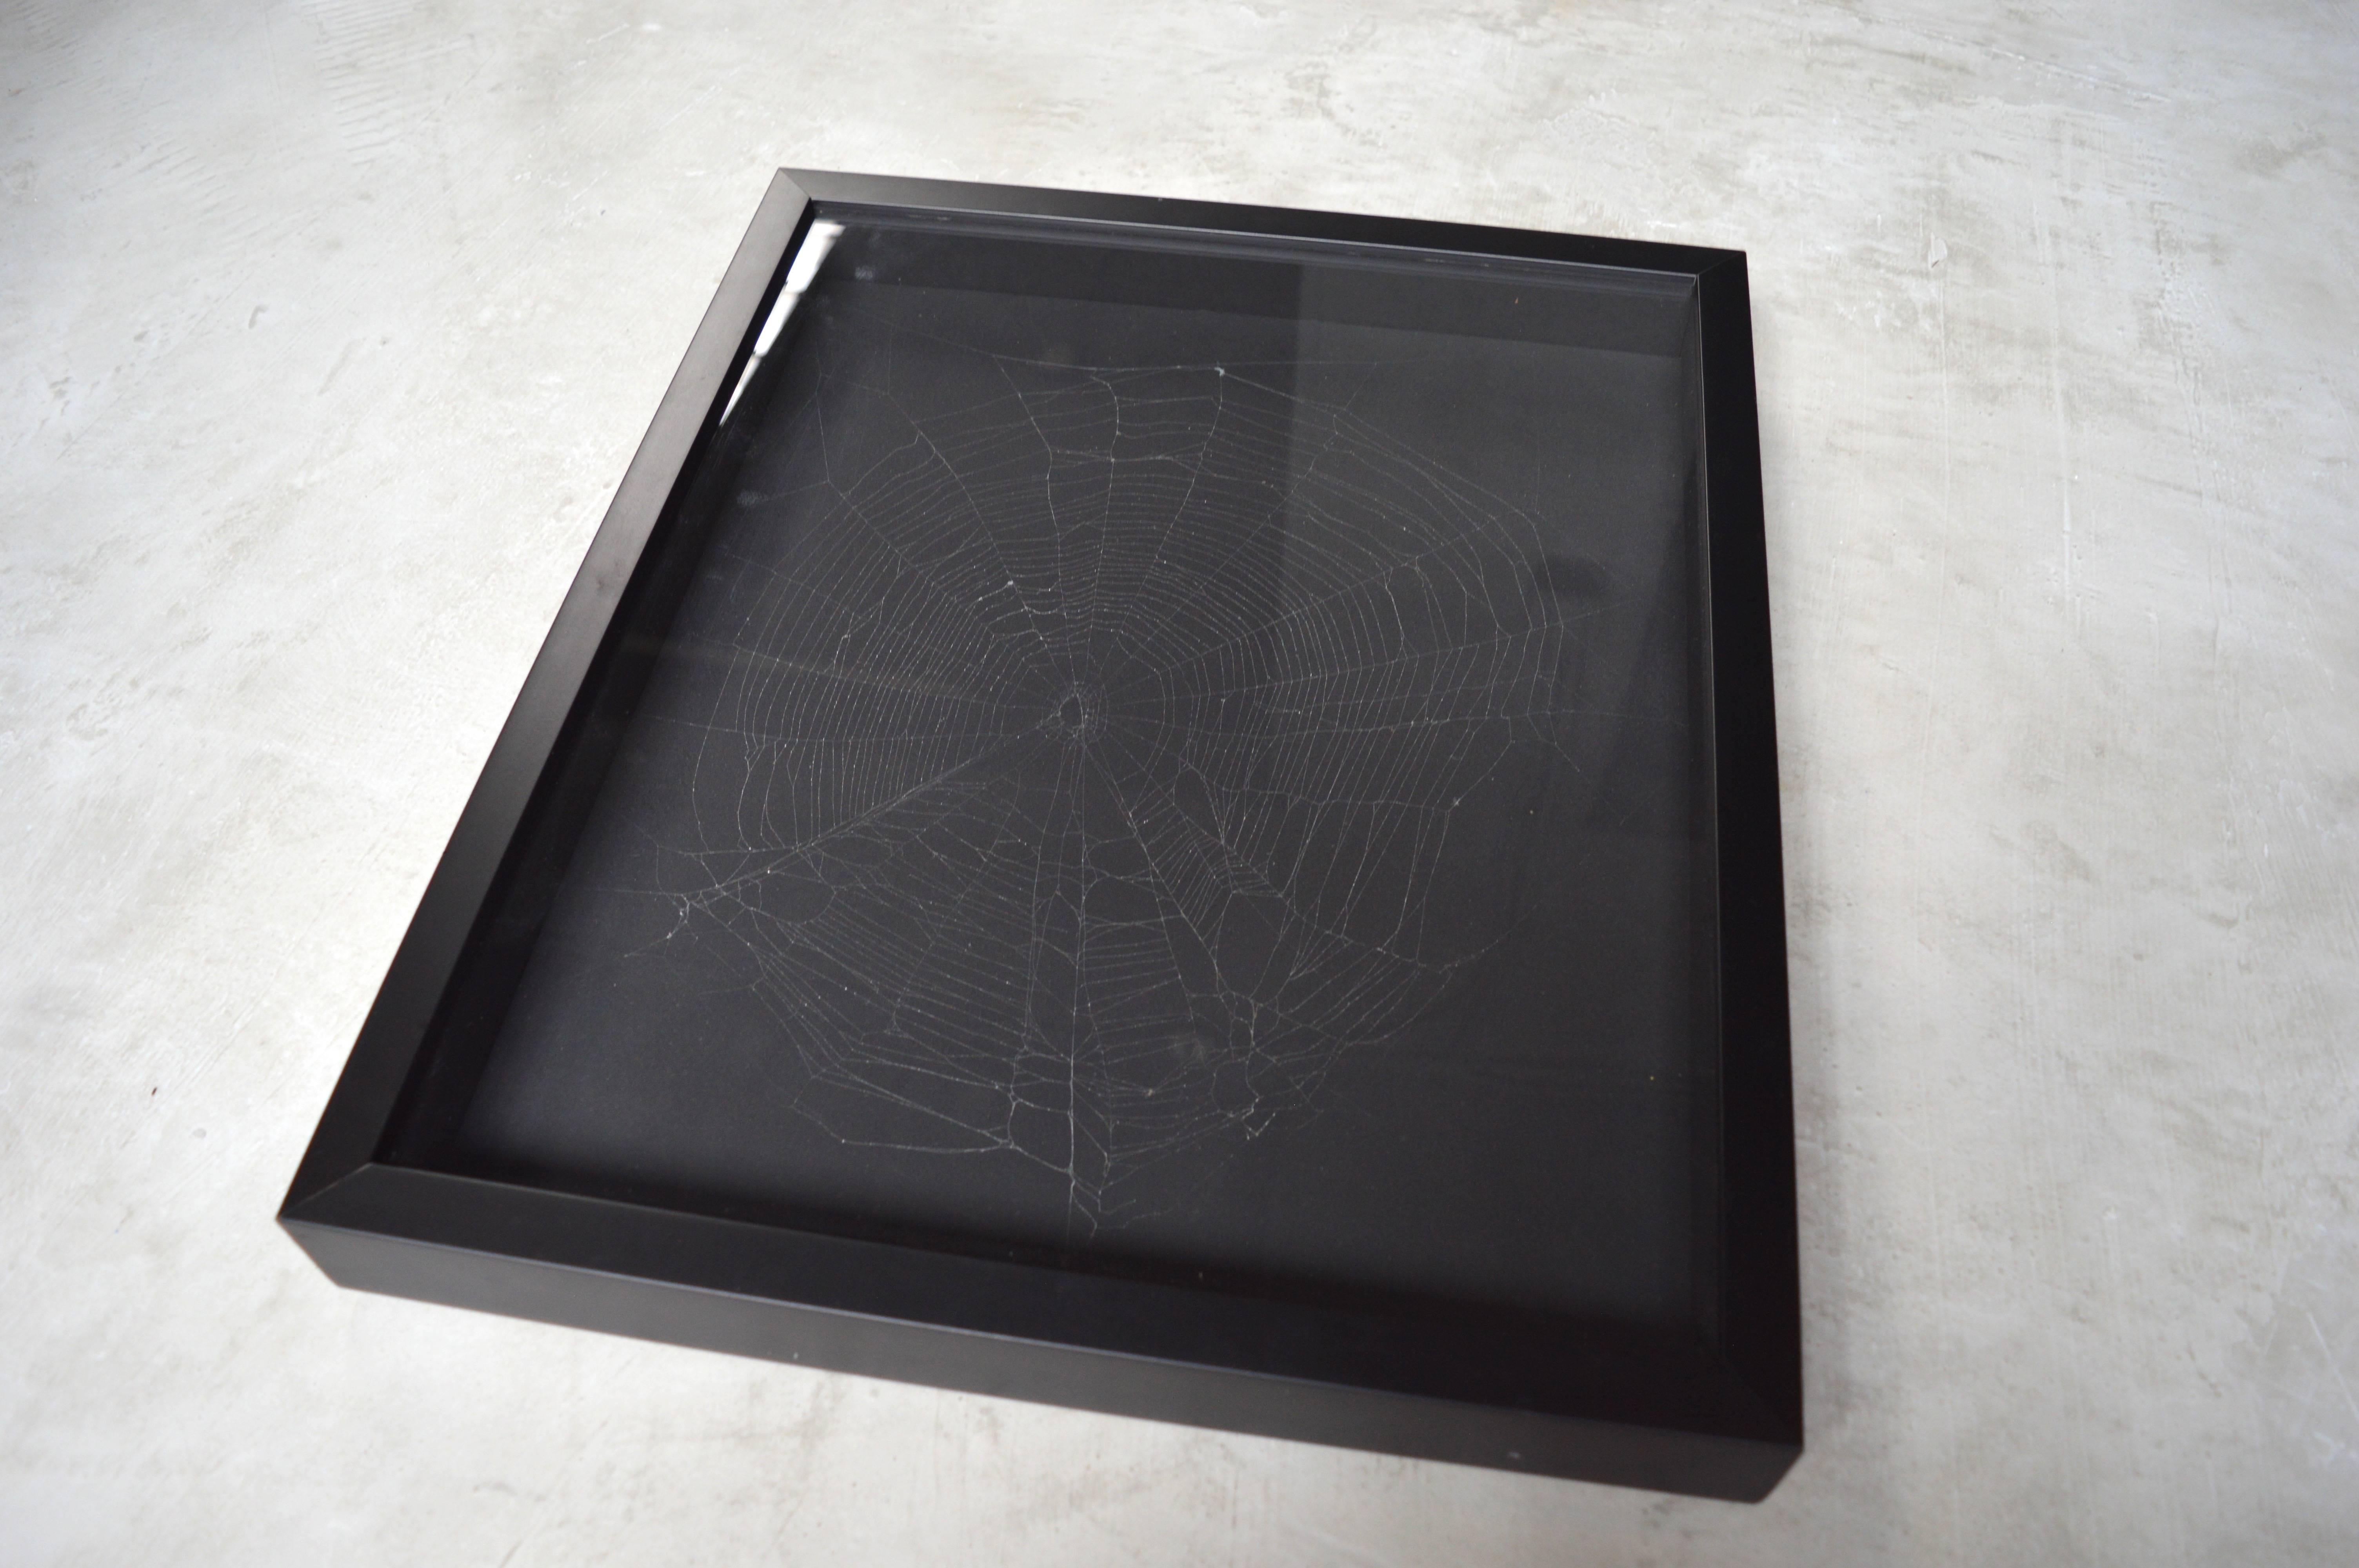 Large-scale real captured spider web with black frame, and behind plastic. Unique object.